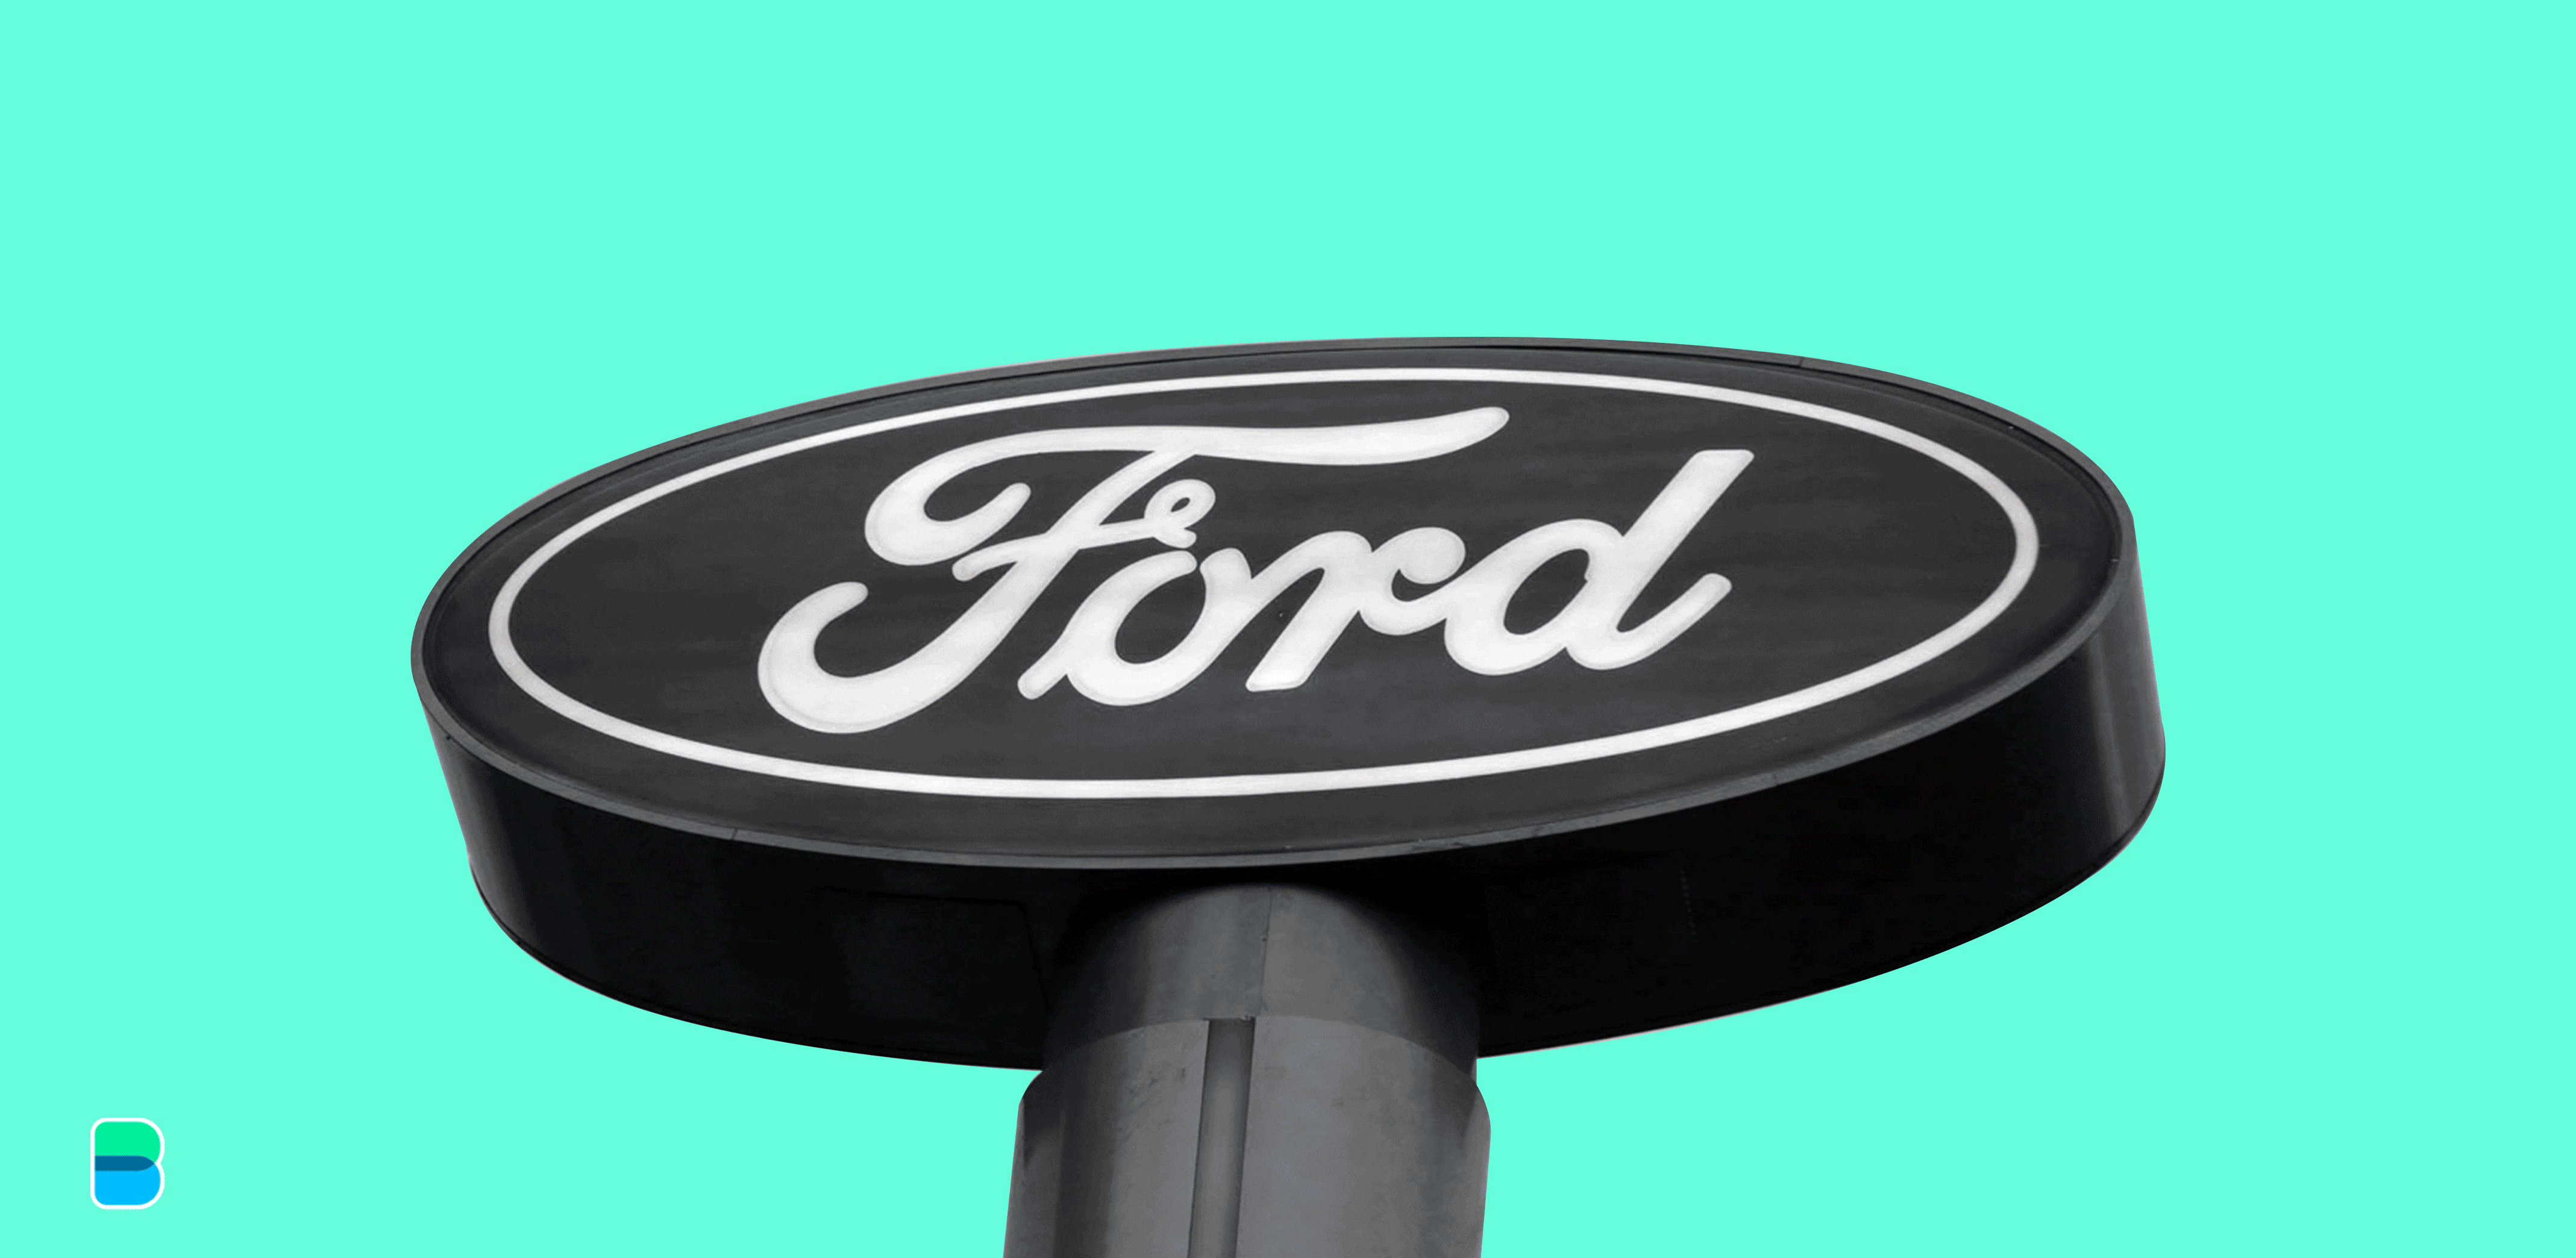 Ford scores a 20-year PR